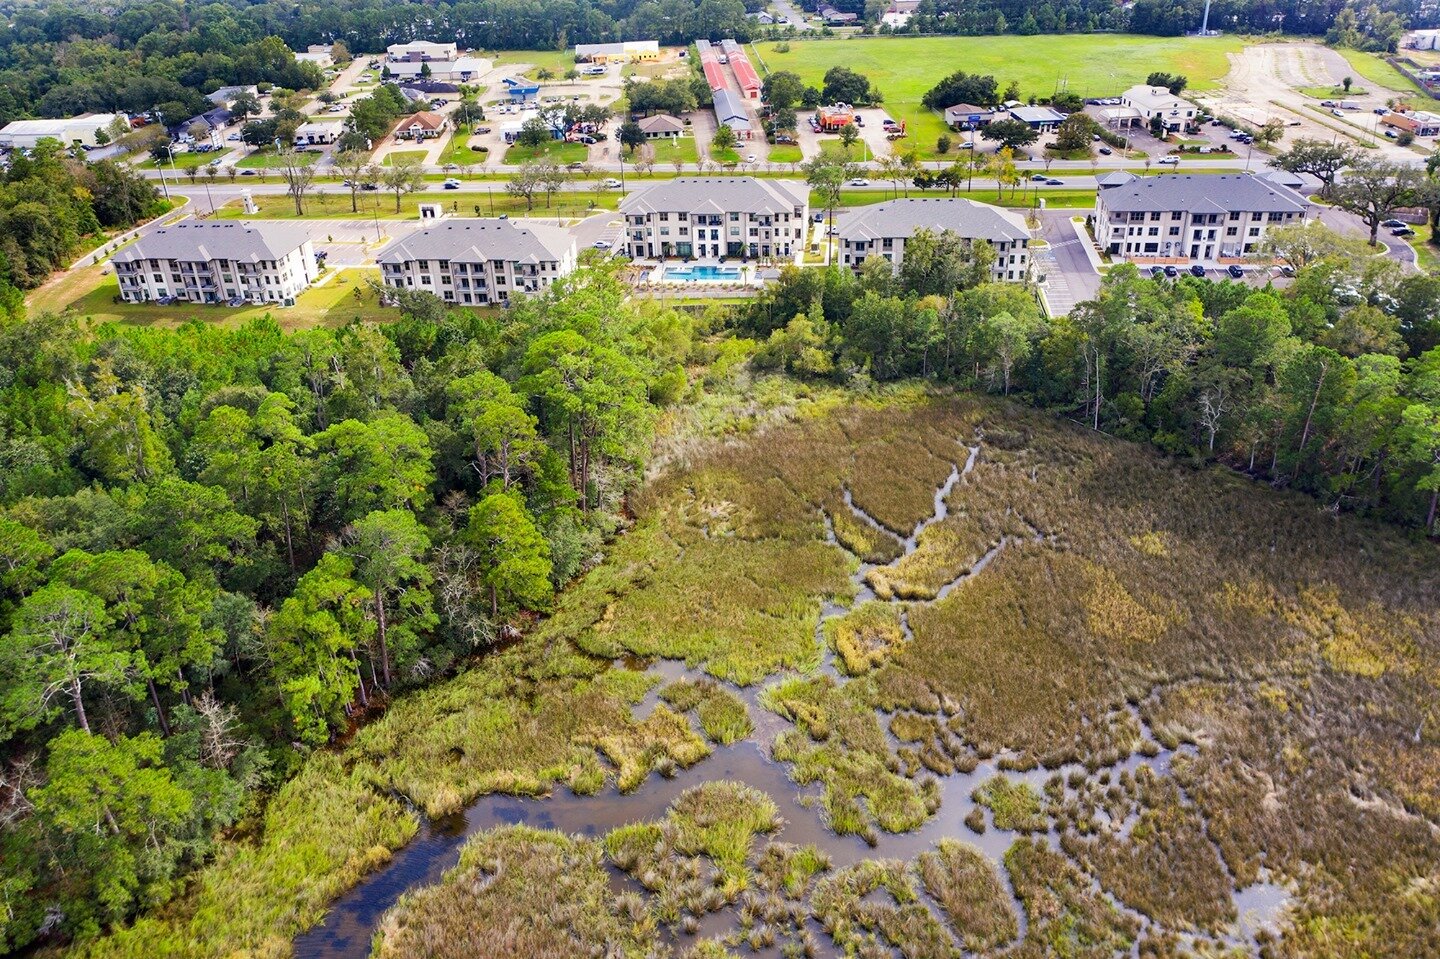 🌴Soaking up this amazing weather over at The Inlet! 🌴Fort Bayou views meets luxury community amenities and high-end condo finishes! Enjoy living moments away from Downtown Ocean Springs and take advantage of the onsite fitness center, resort-style 